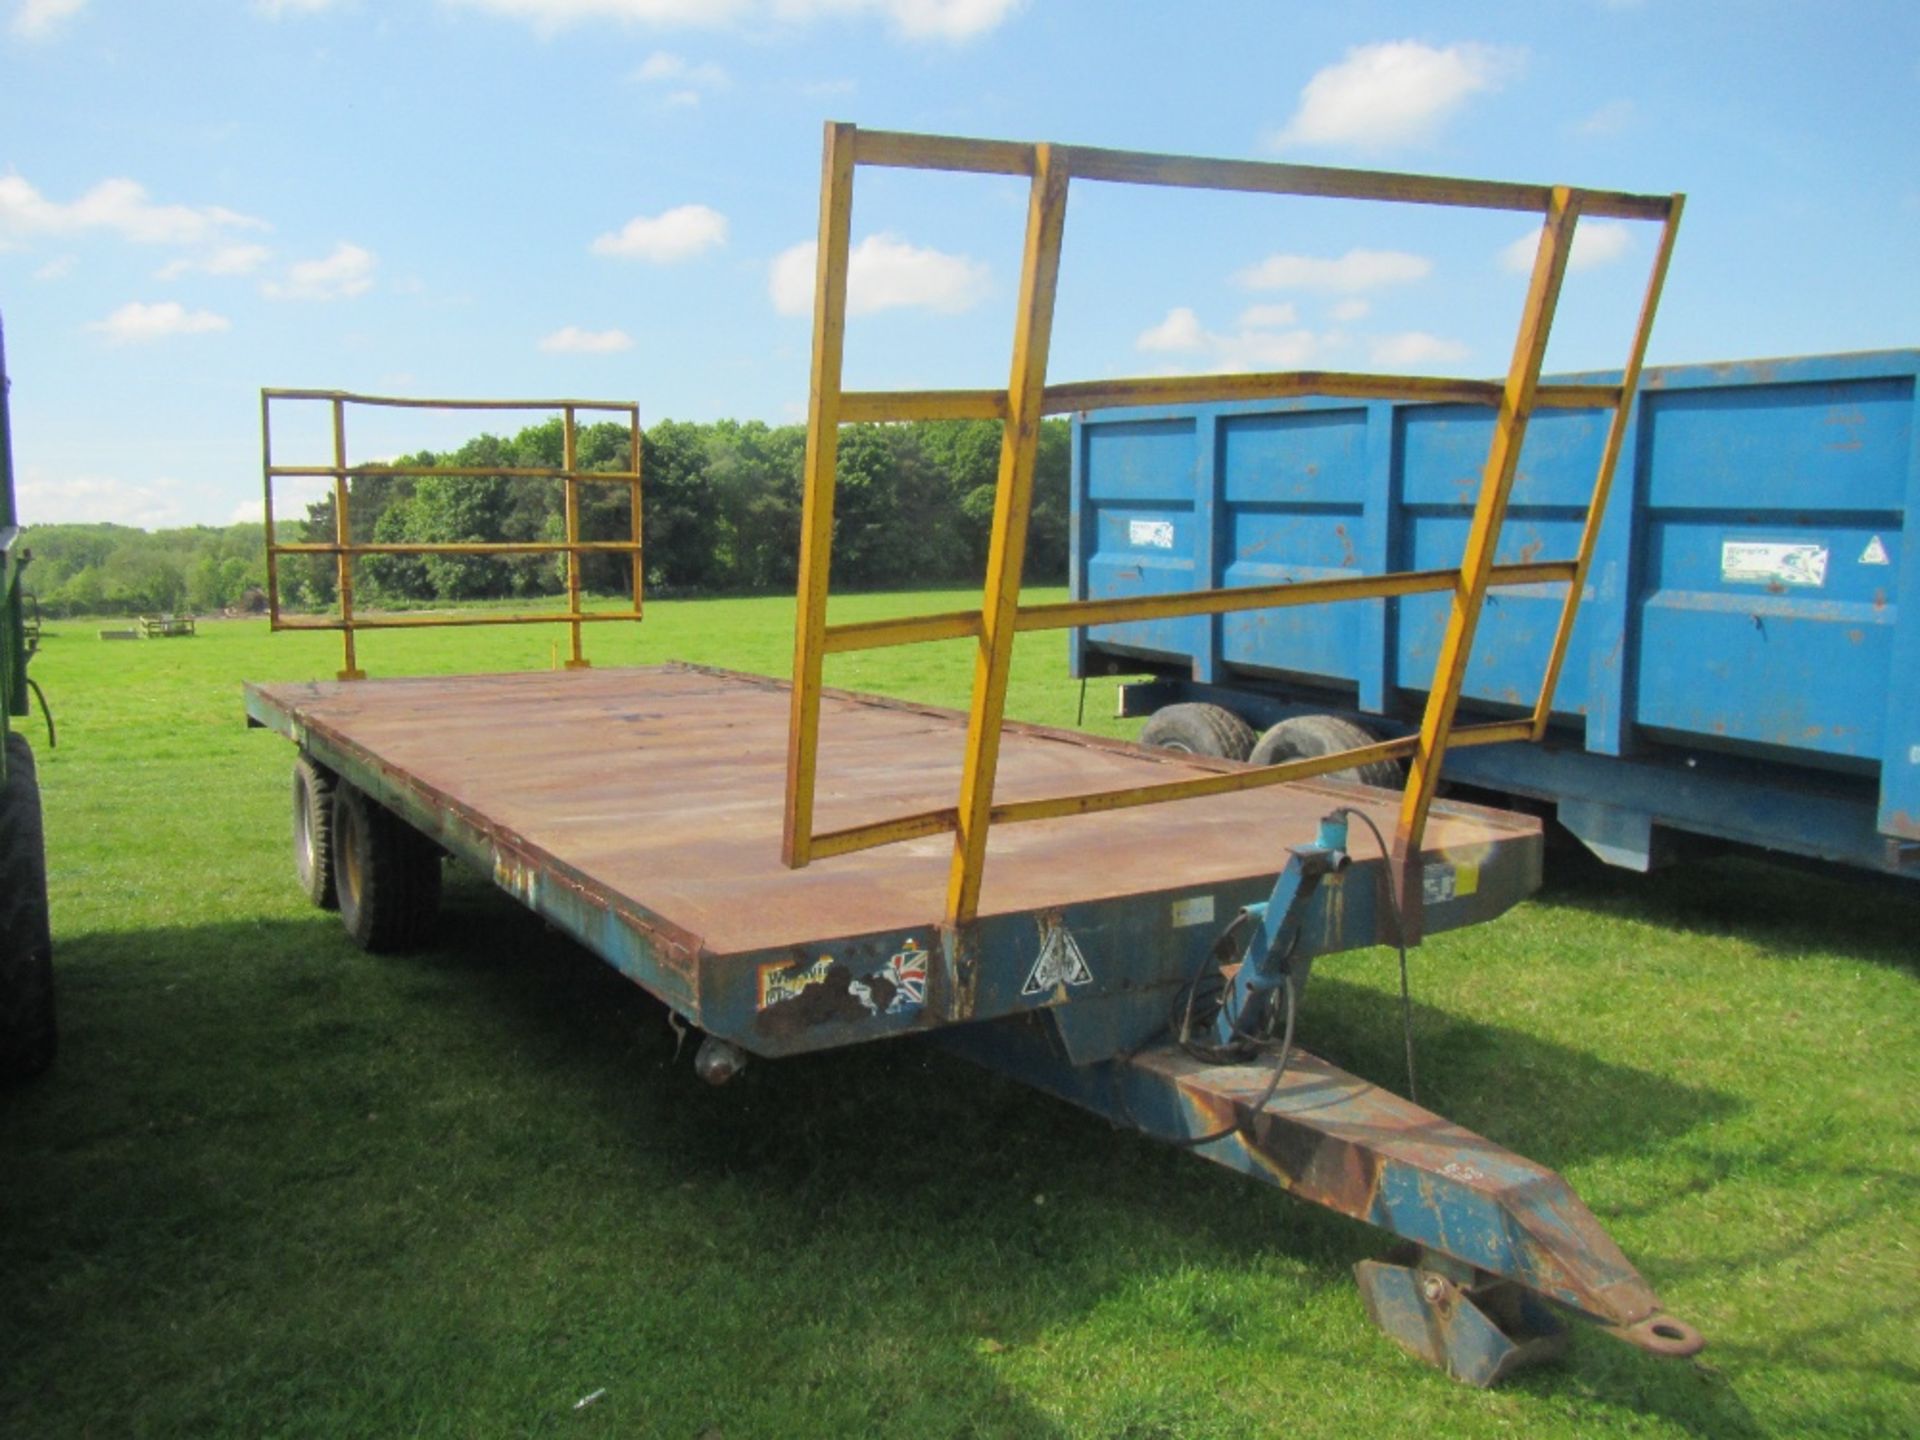 1995 12tonne tandem axle 21ft steel flat bed trailer Serial No. 1095MAY501